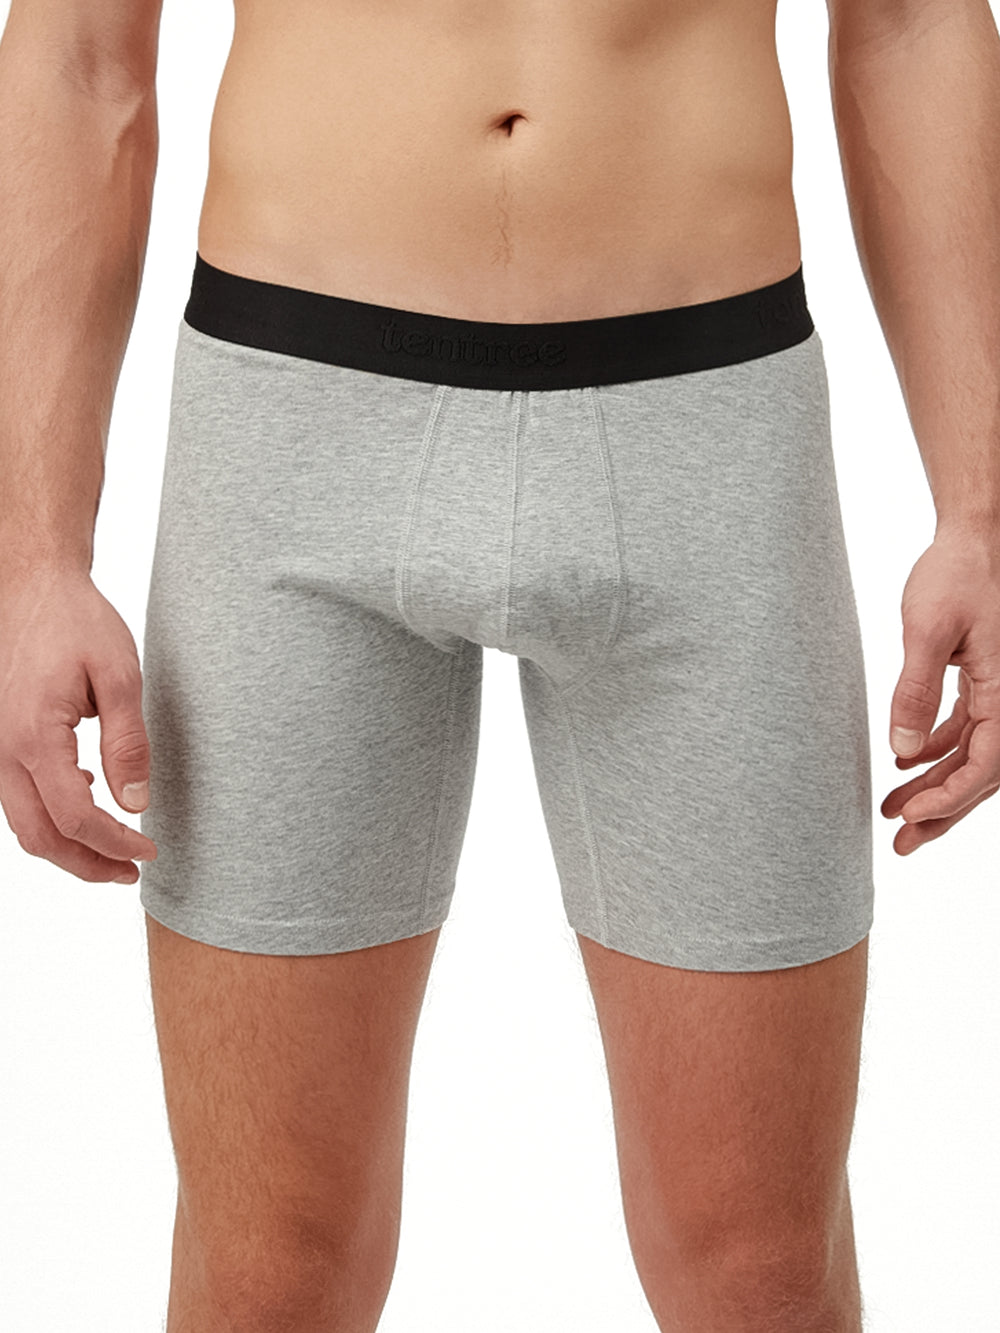 TENTREE 7" BOXER BRIEF - CLEARANCE